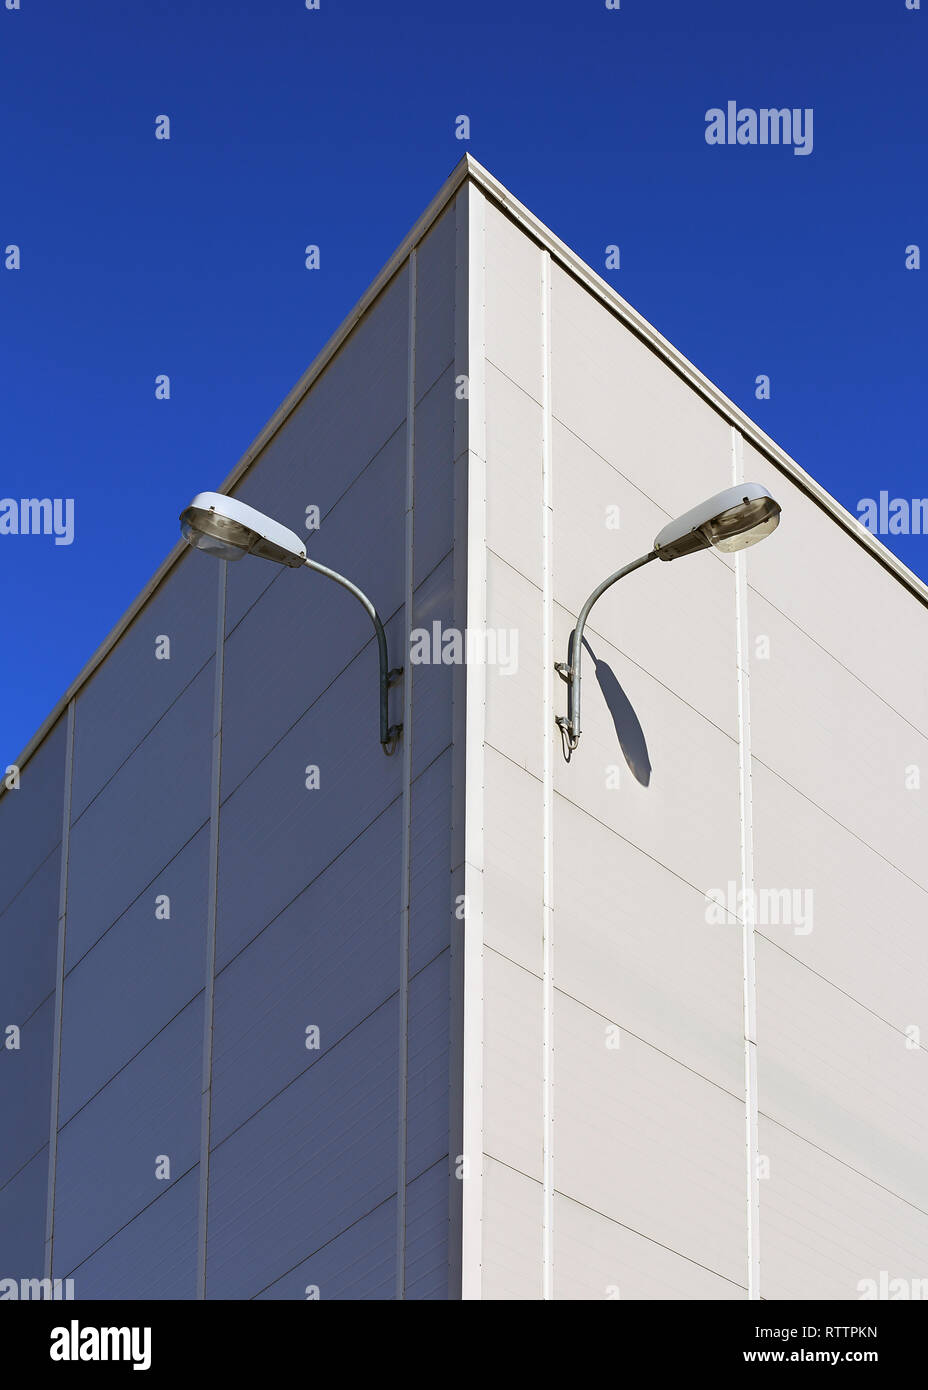 Two lamps on the outside wall of an industrial building Stock Photo